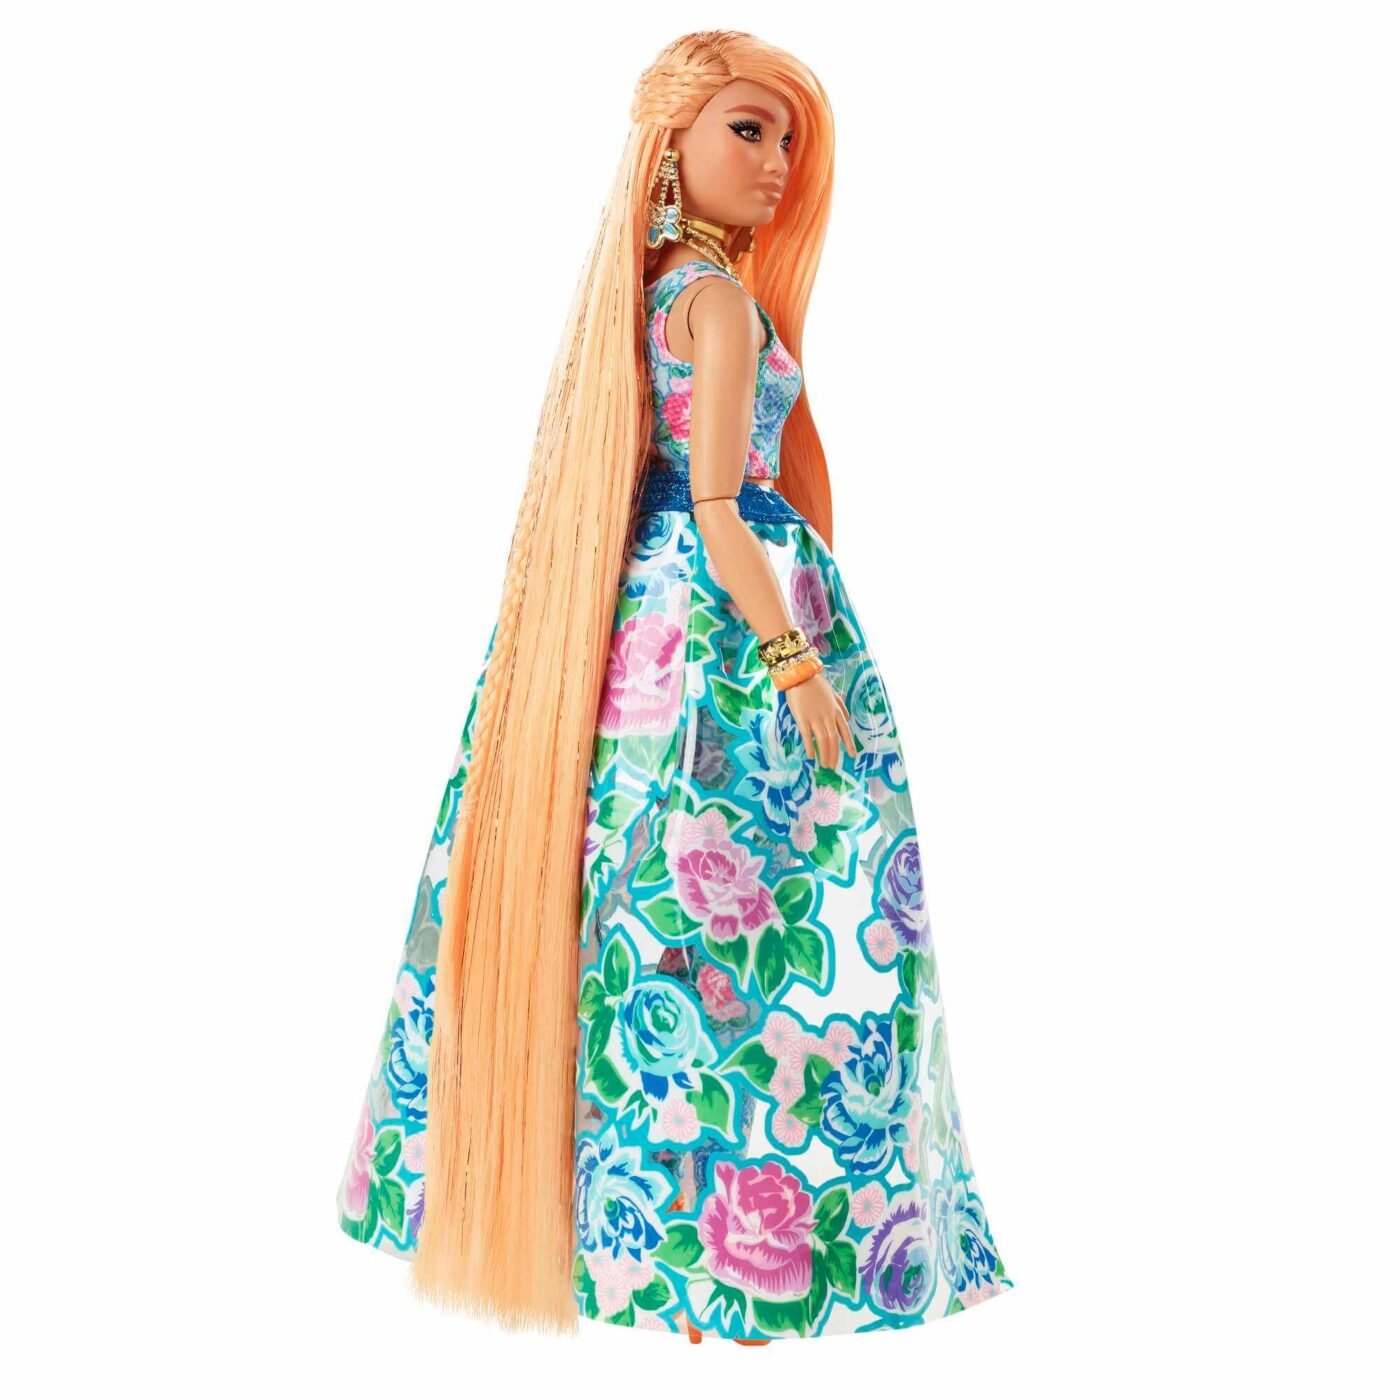 Barbie - Extra Fancy Doll in Floral Gown with Pet1